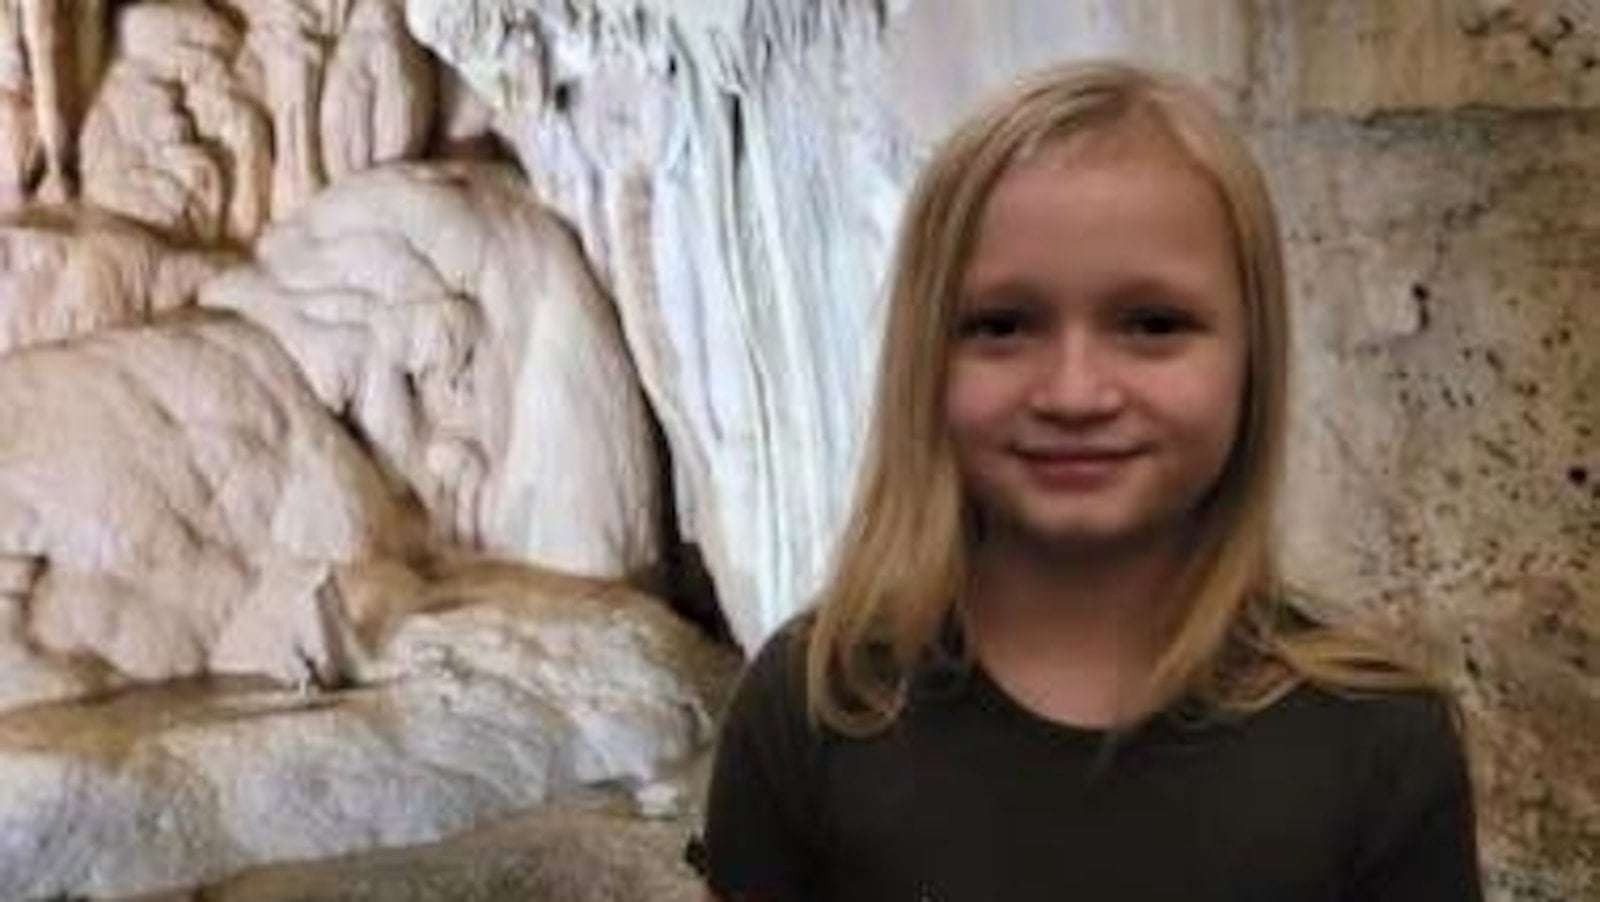 image for Missing 11-year-old's body found in Texas river: Police